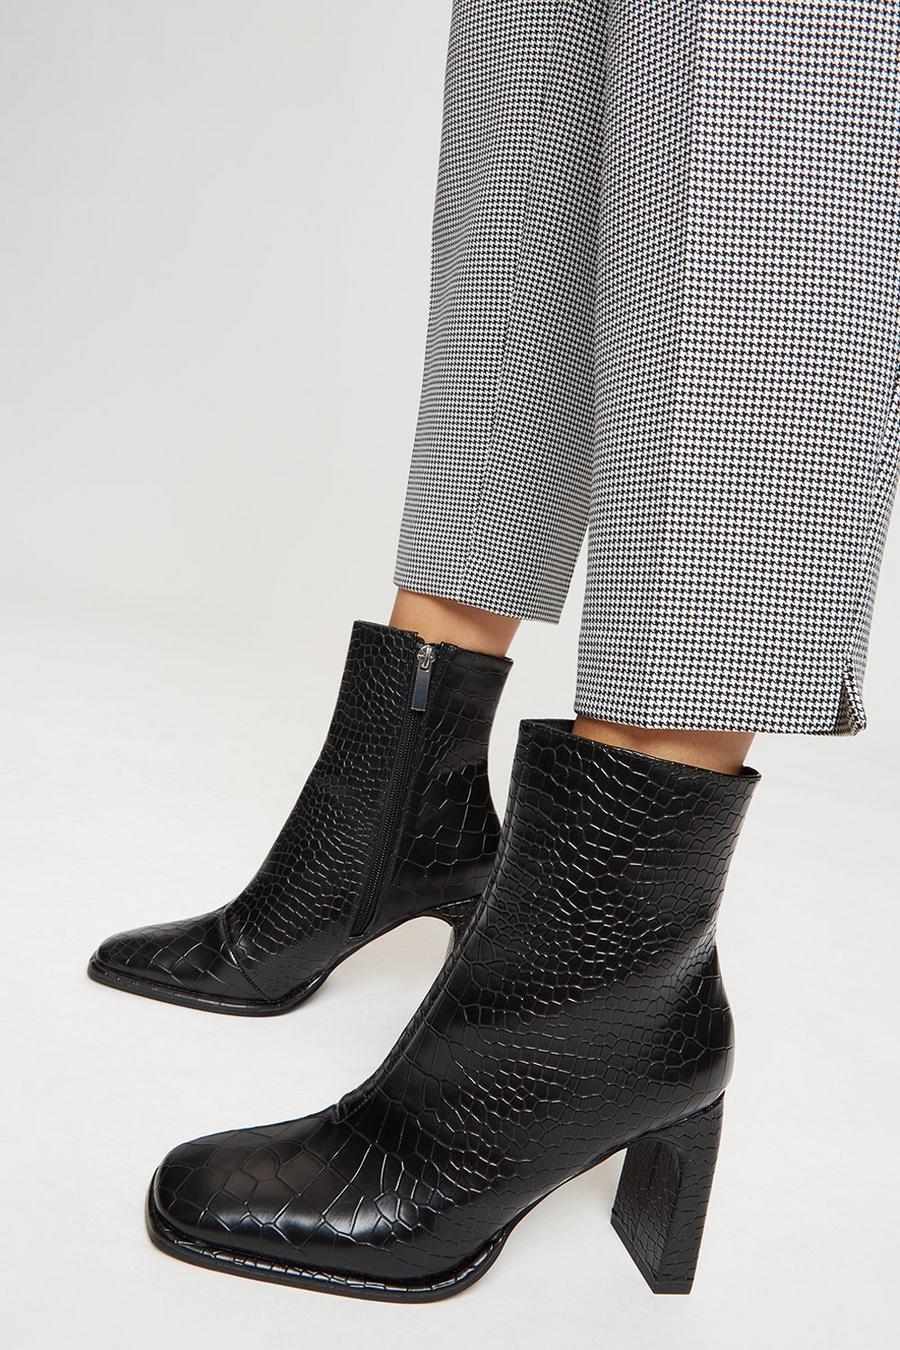 Principles: Arvie Ankle Boot